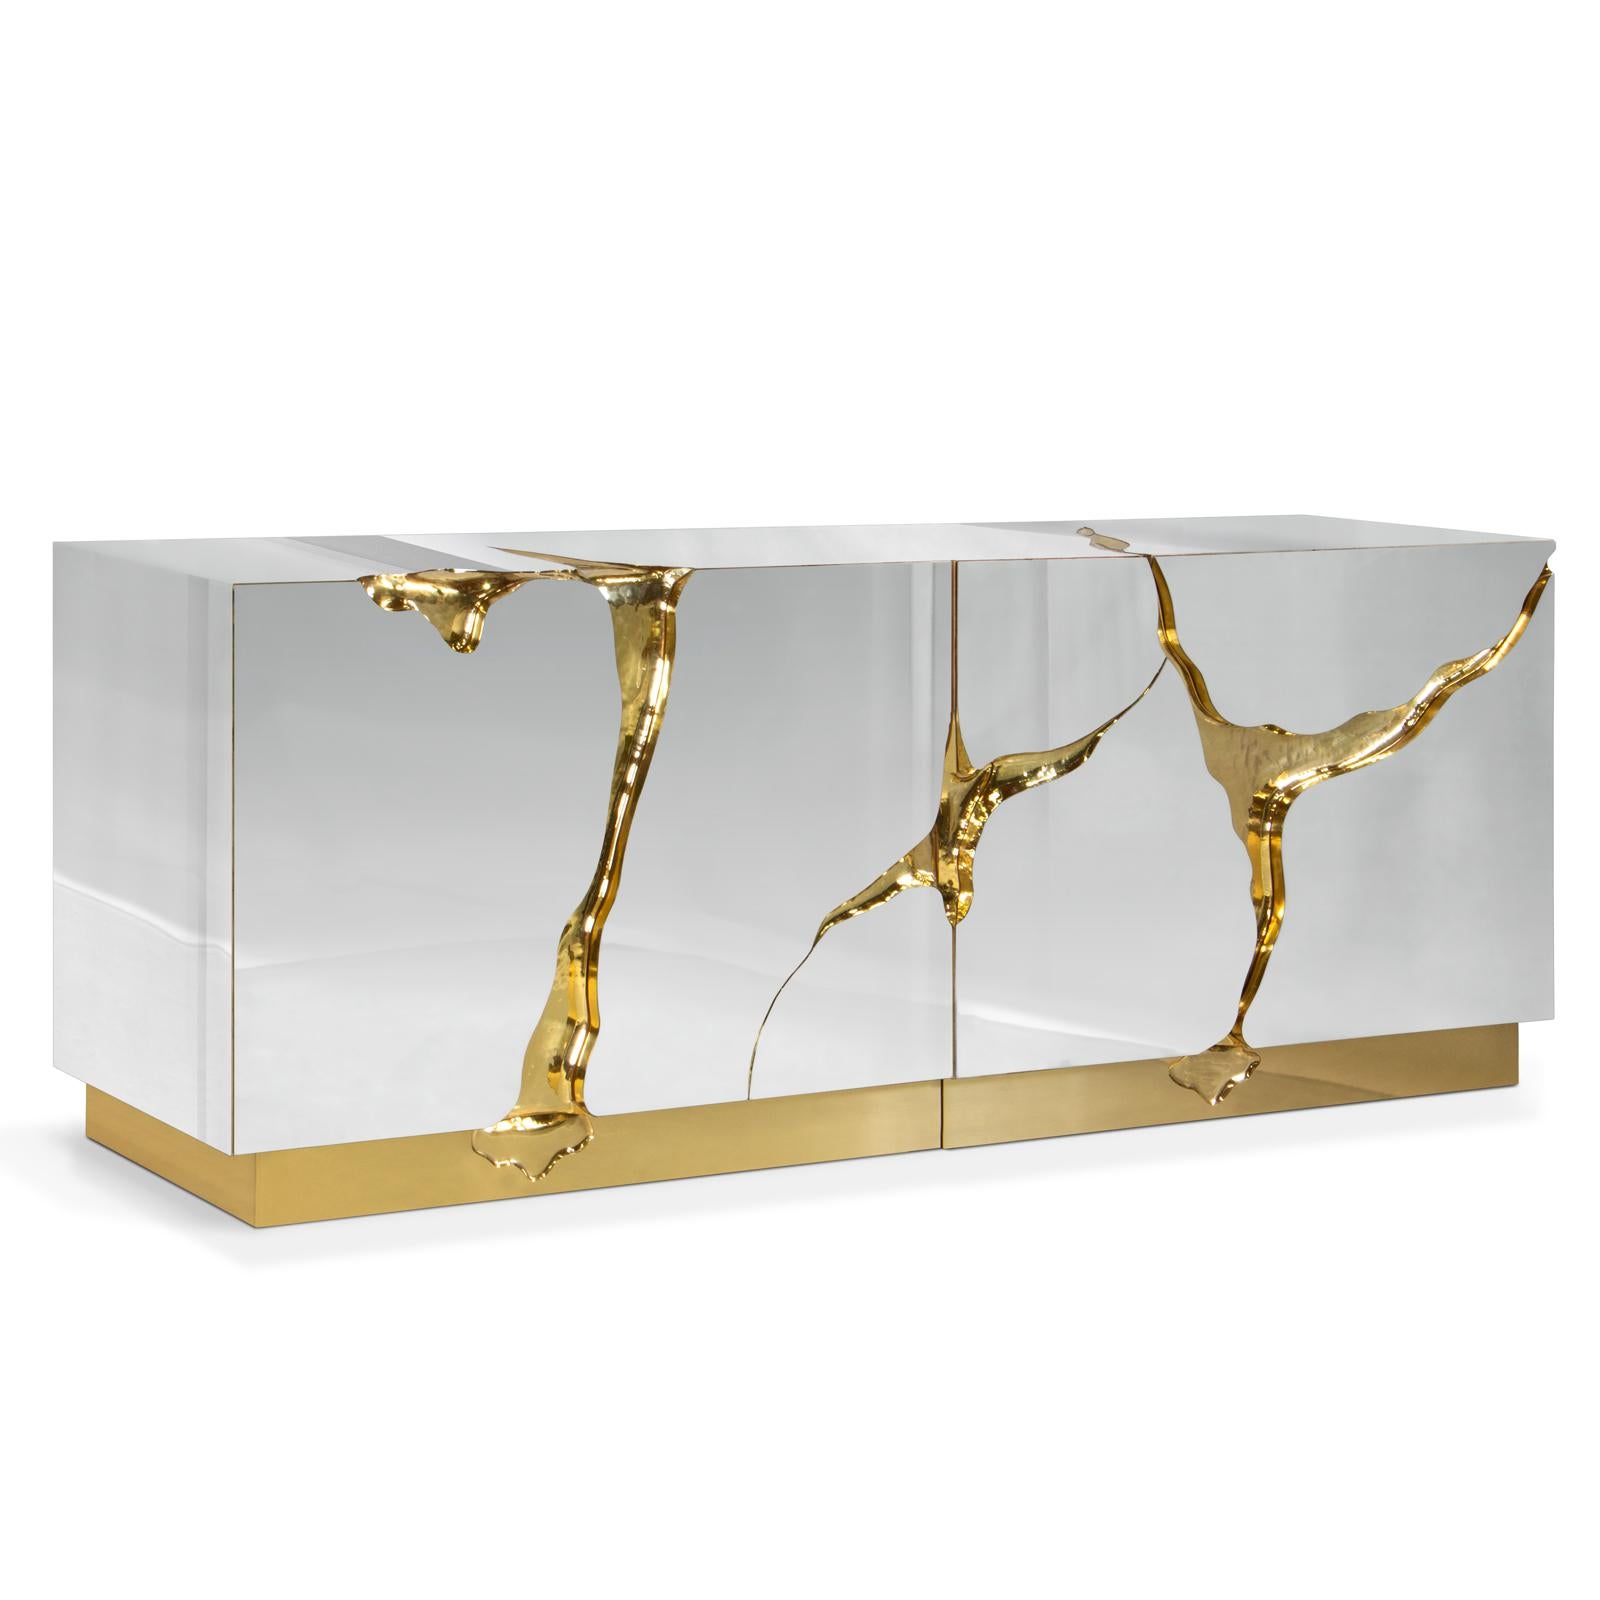 Sideboard paradise with wood carving structure
with details finished in polished solid brass in gold
finish. Coated with polished stainless steel. Inside in
poplar wood veener. Exceptional piece.